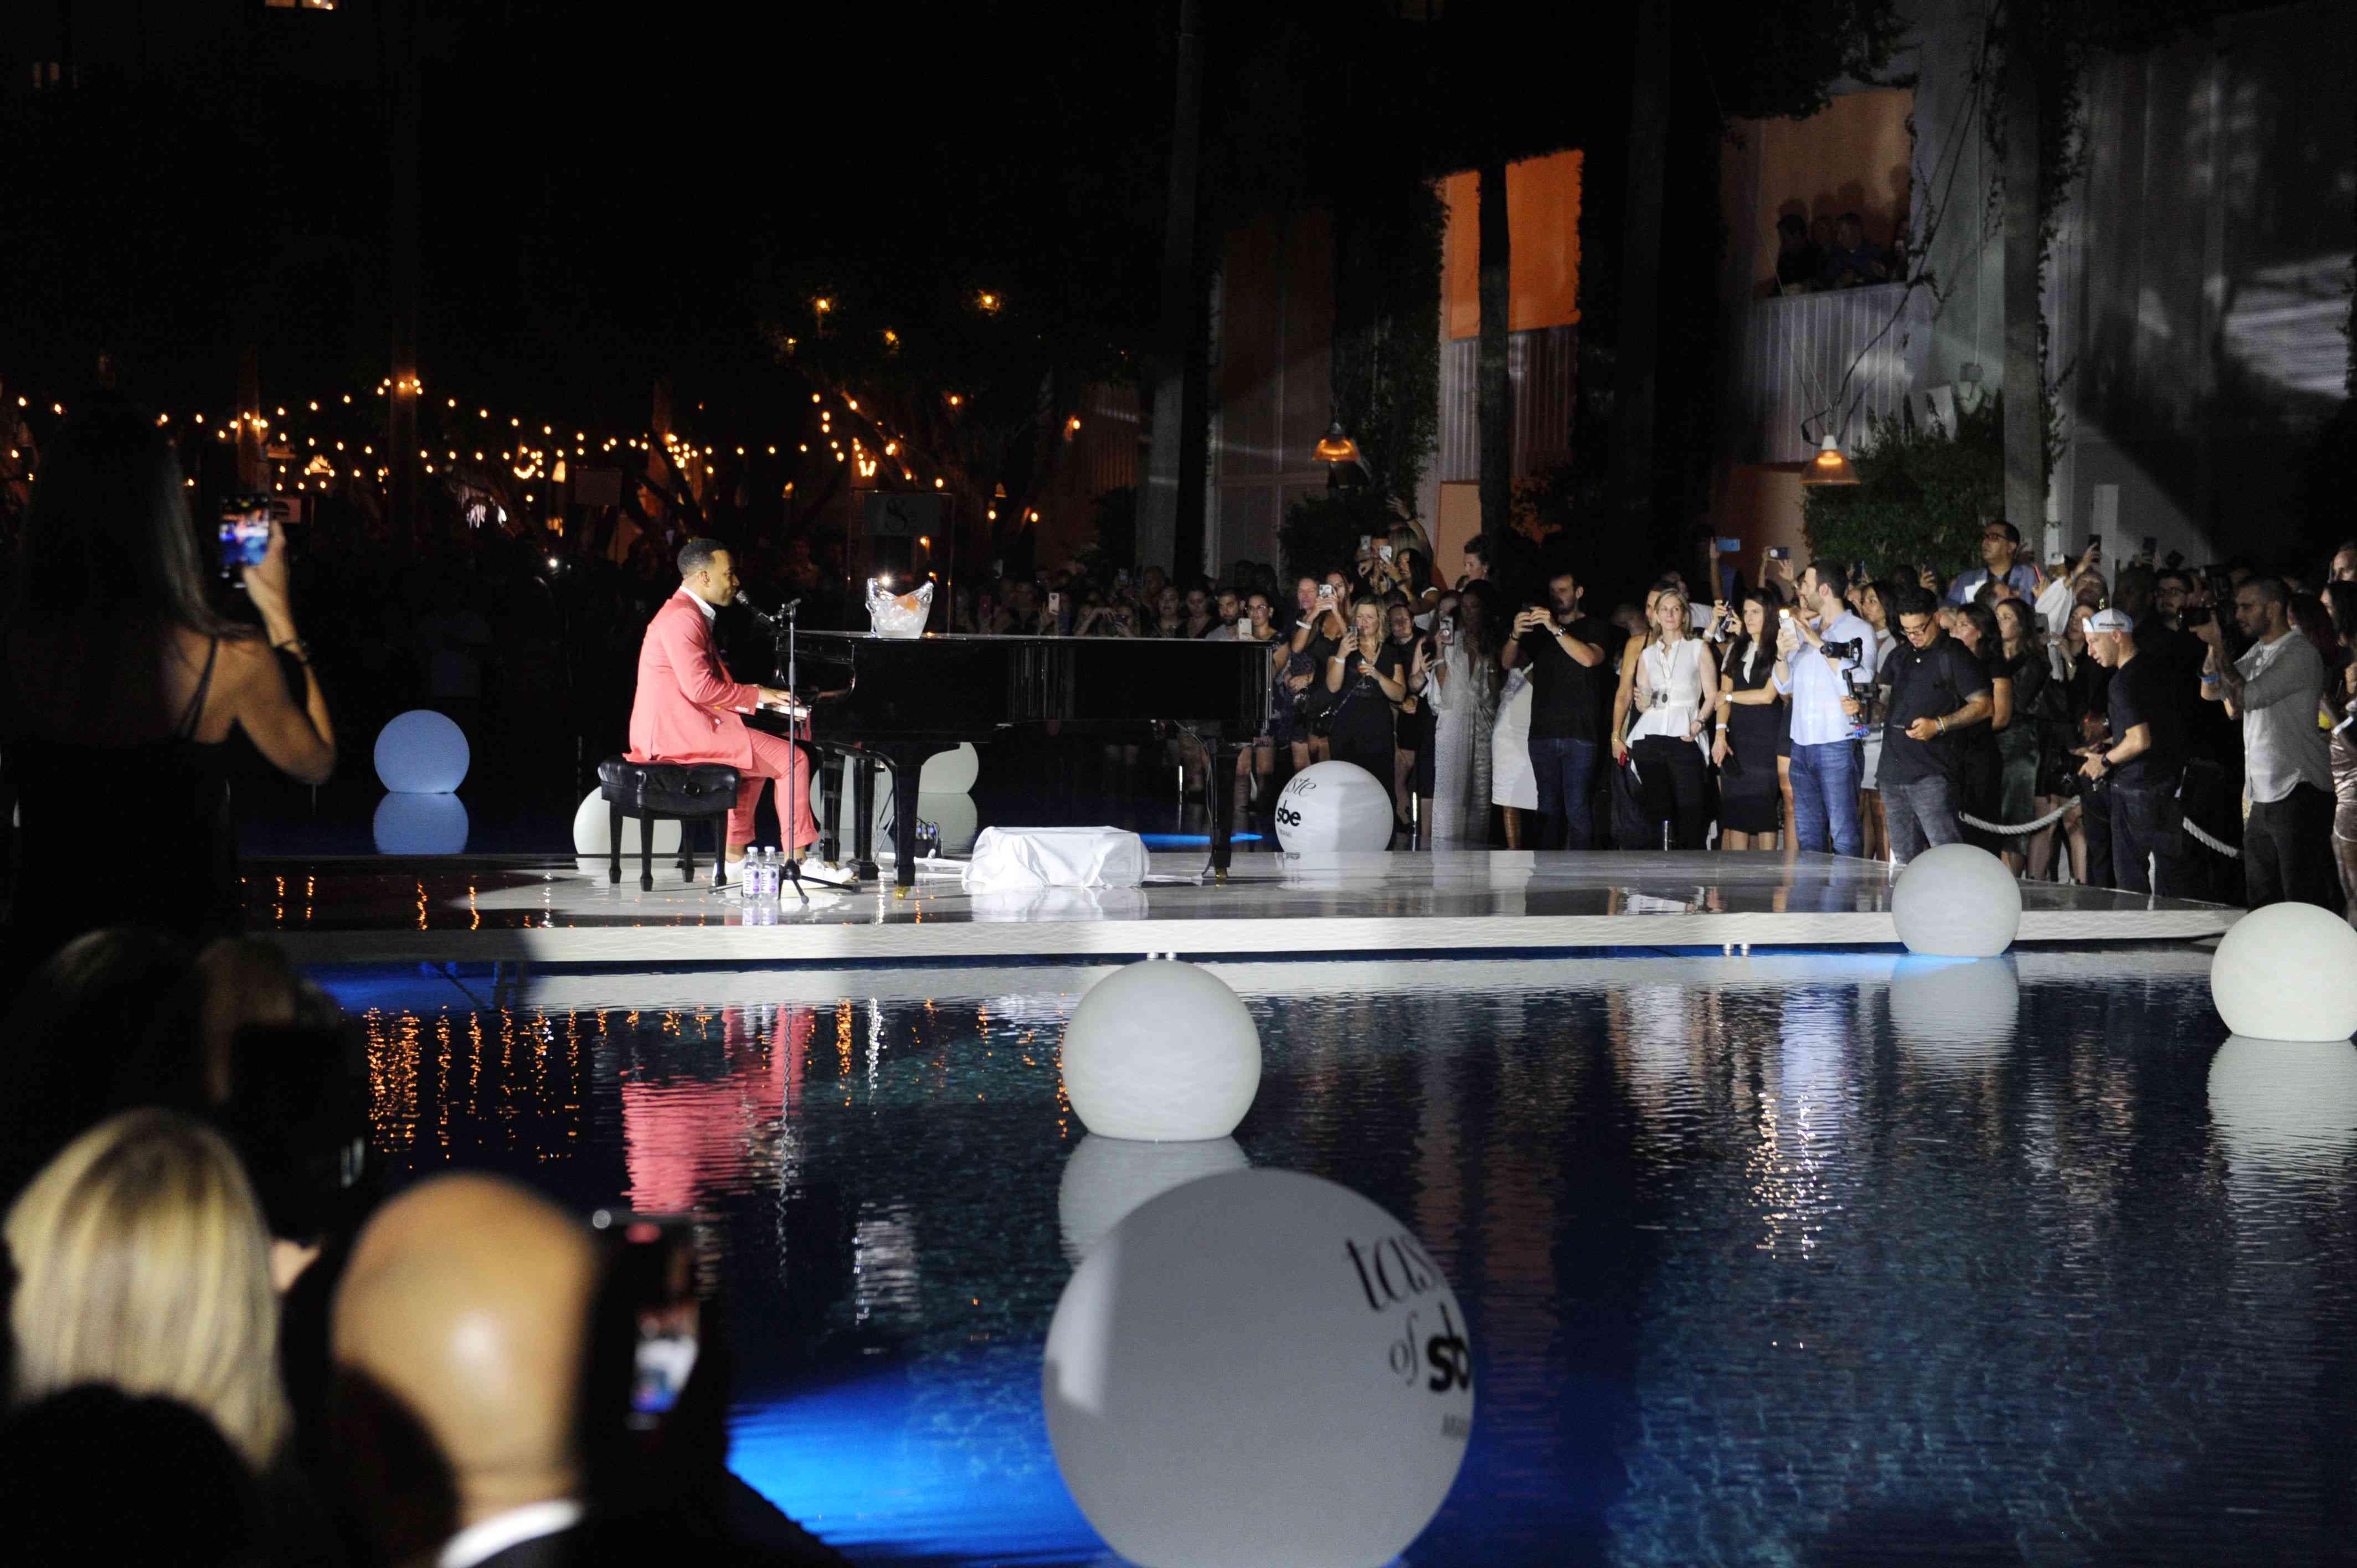 John Legend at a piano by a pool